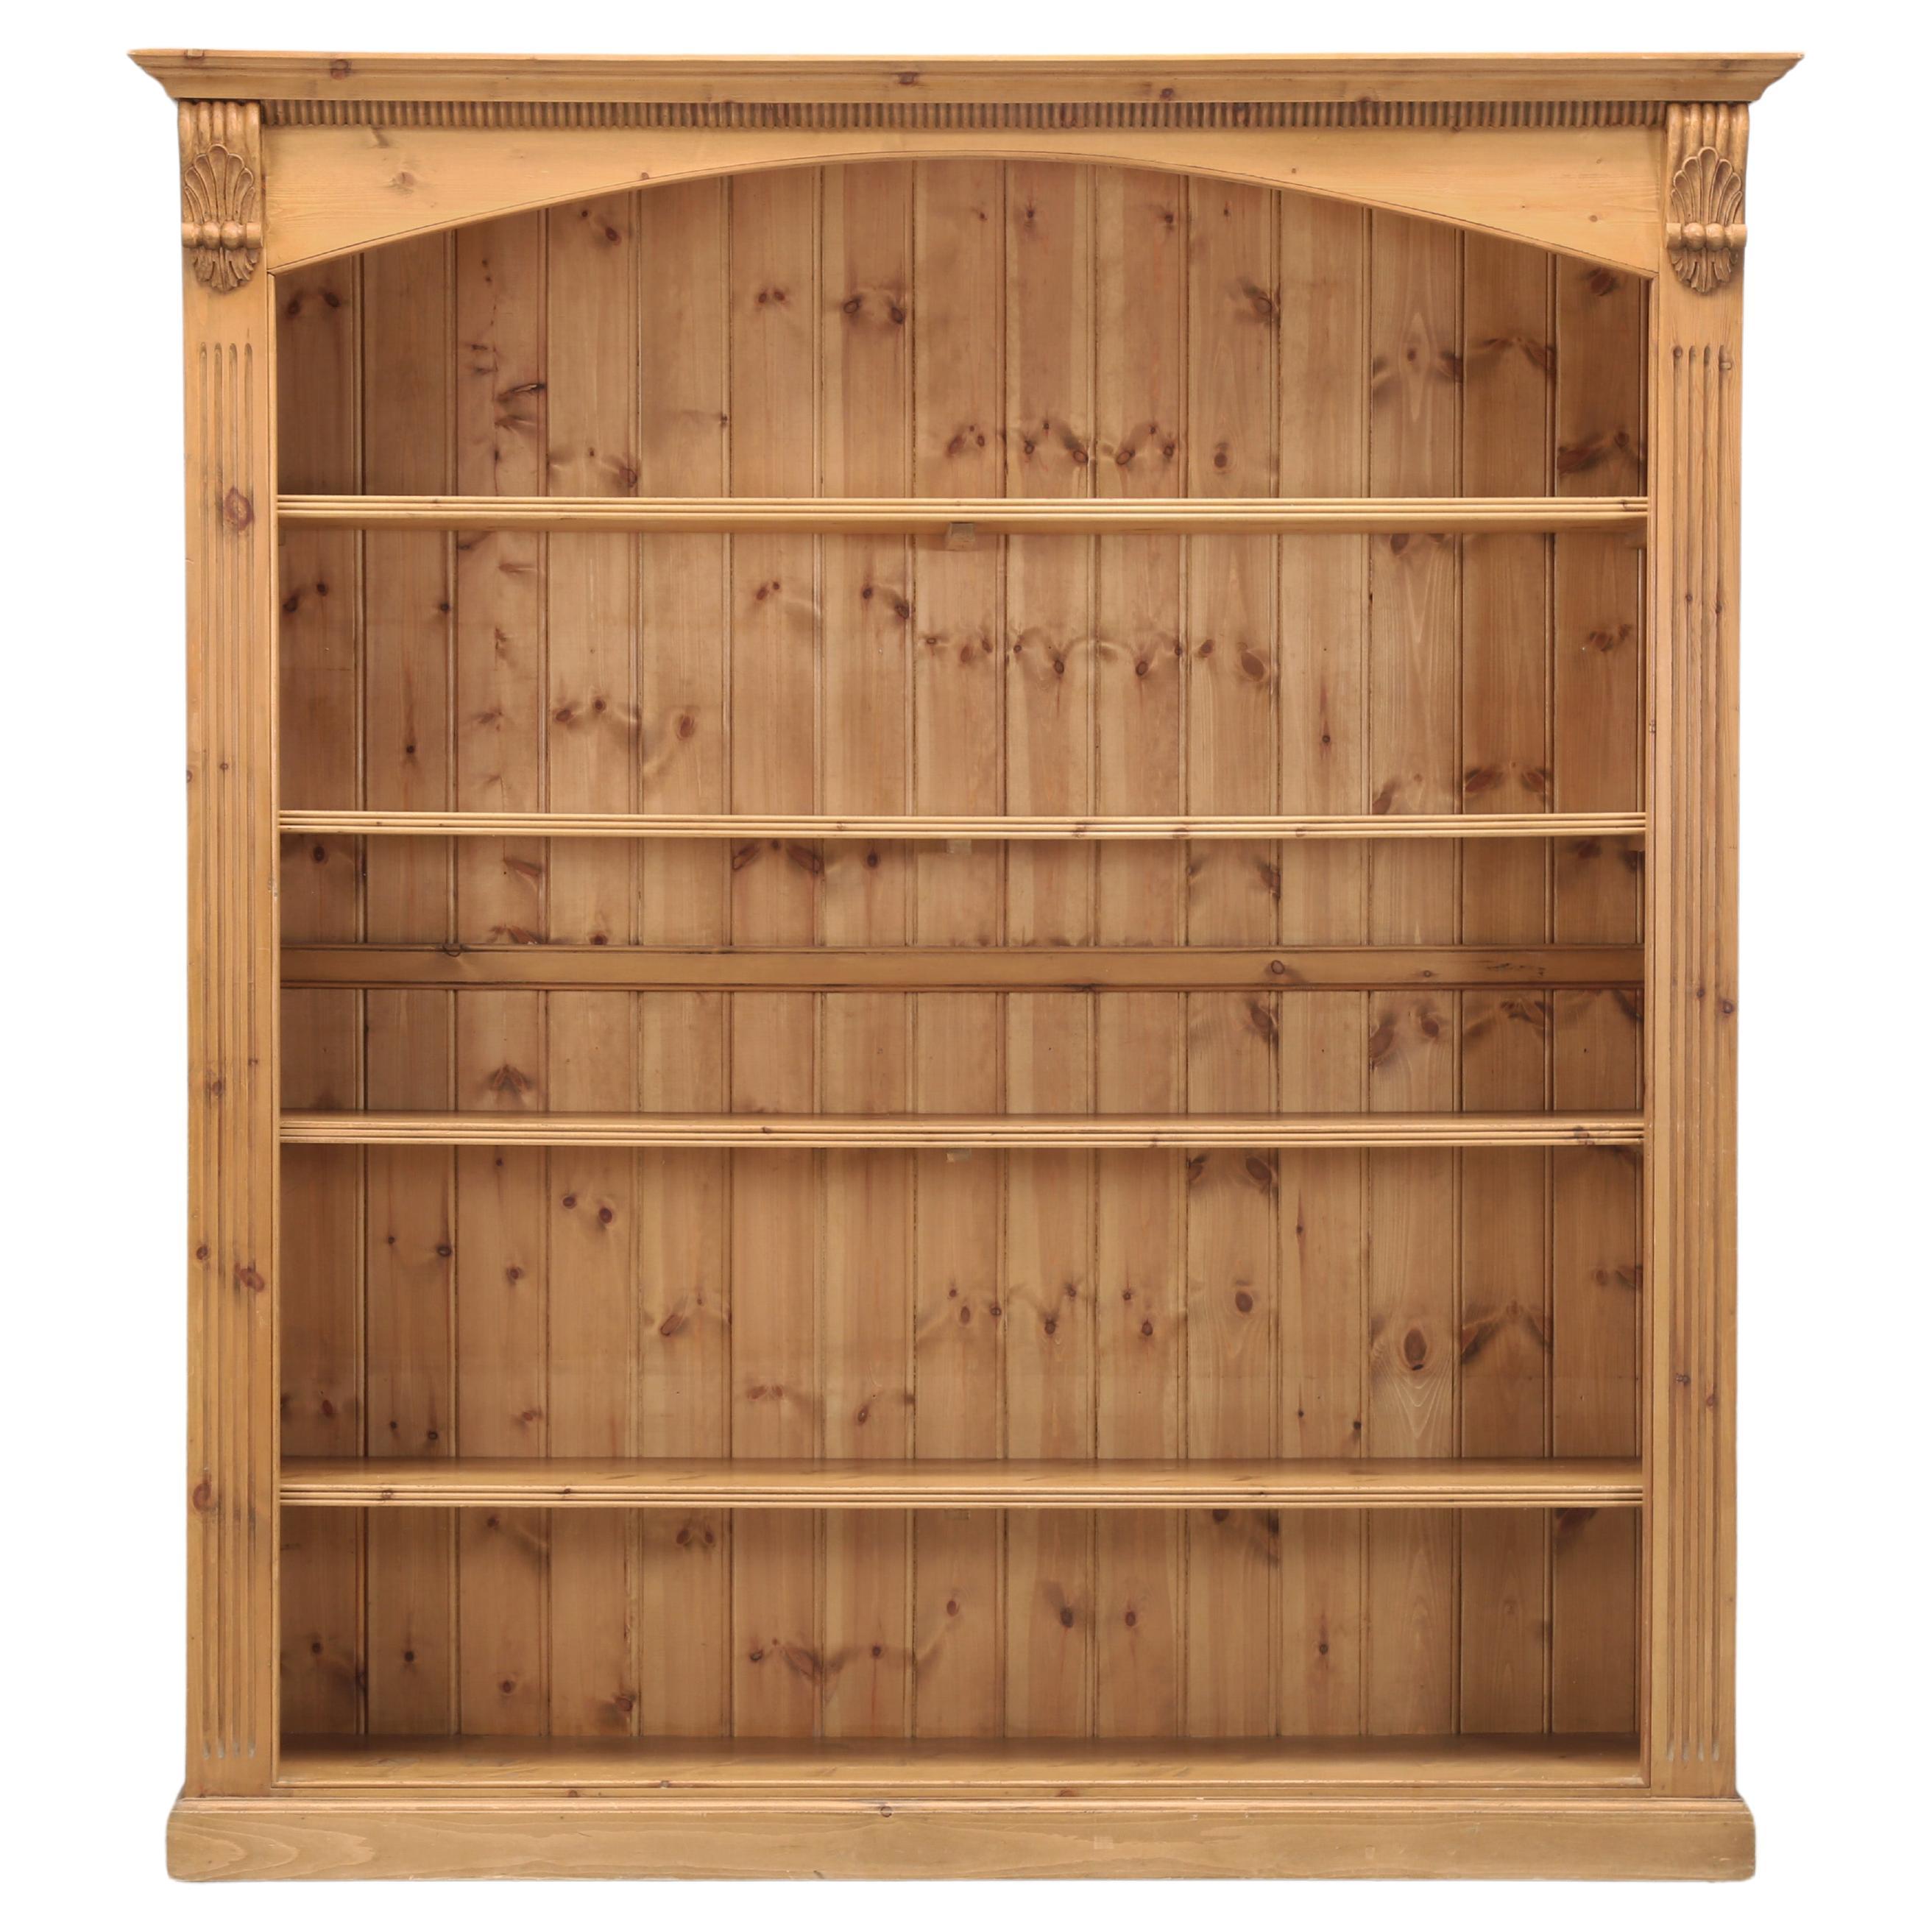 English Pine Bookcase Exceptionally Wide, Traditional Beeswax Finish by Chrispyn For Sale